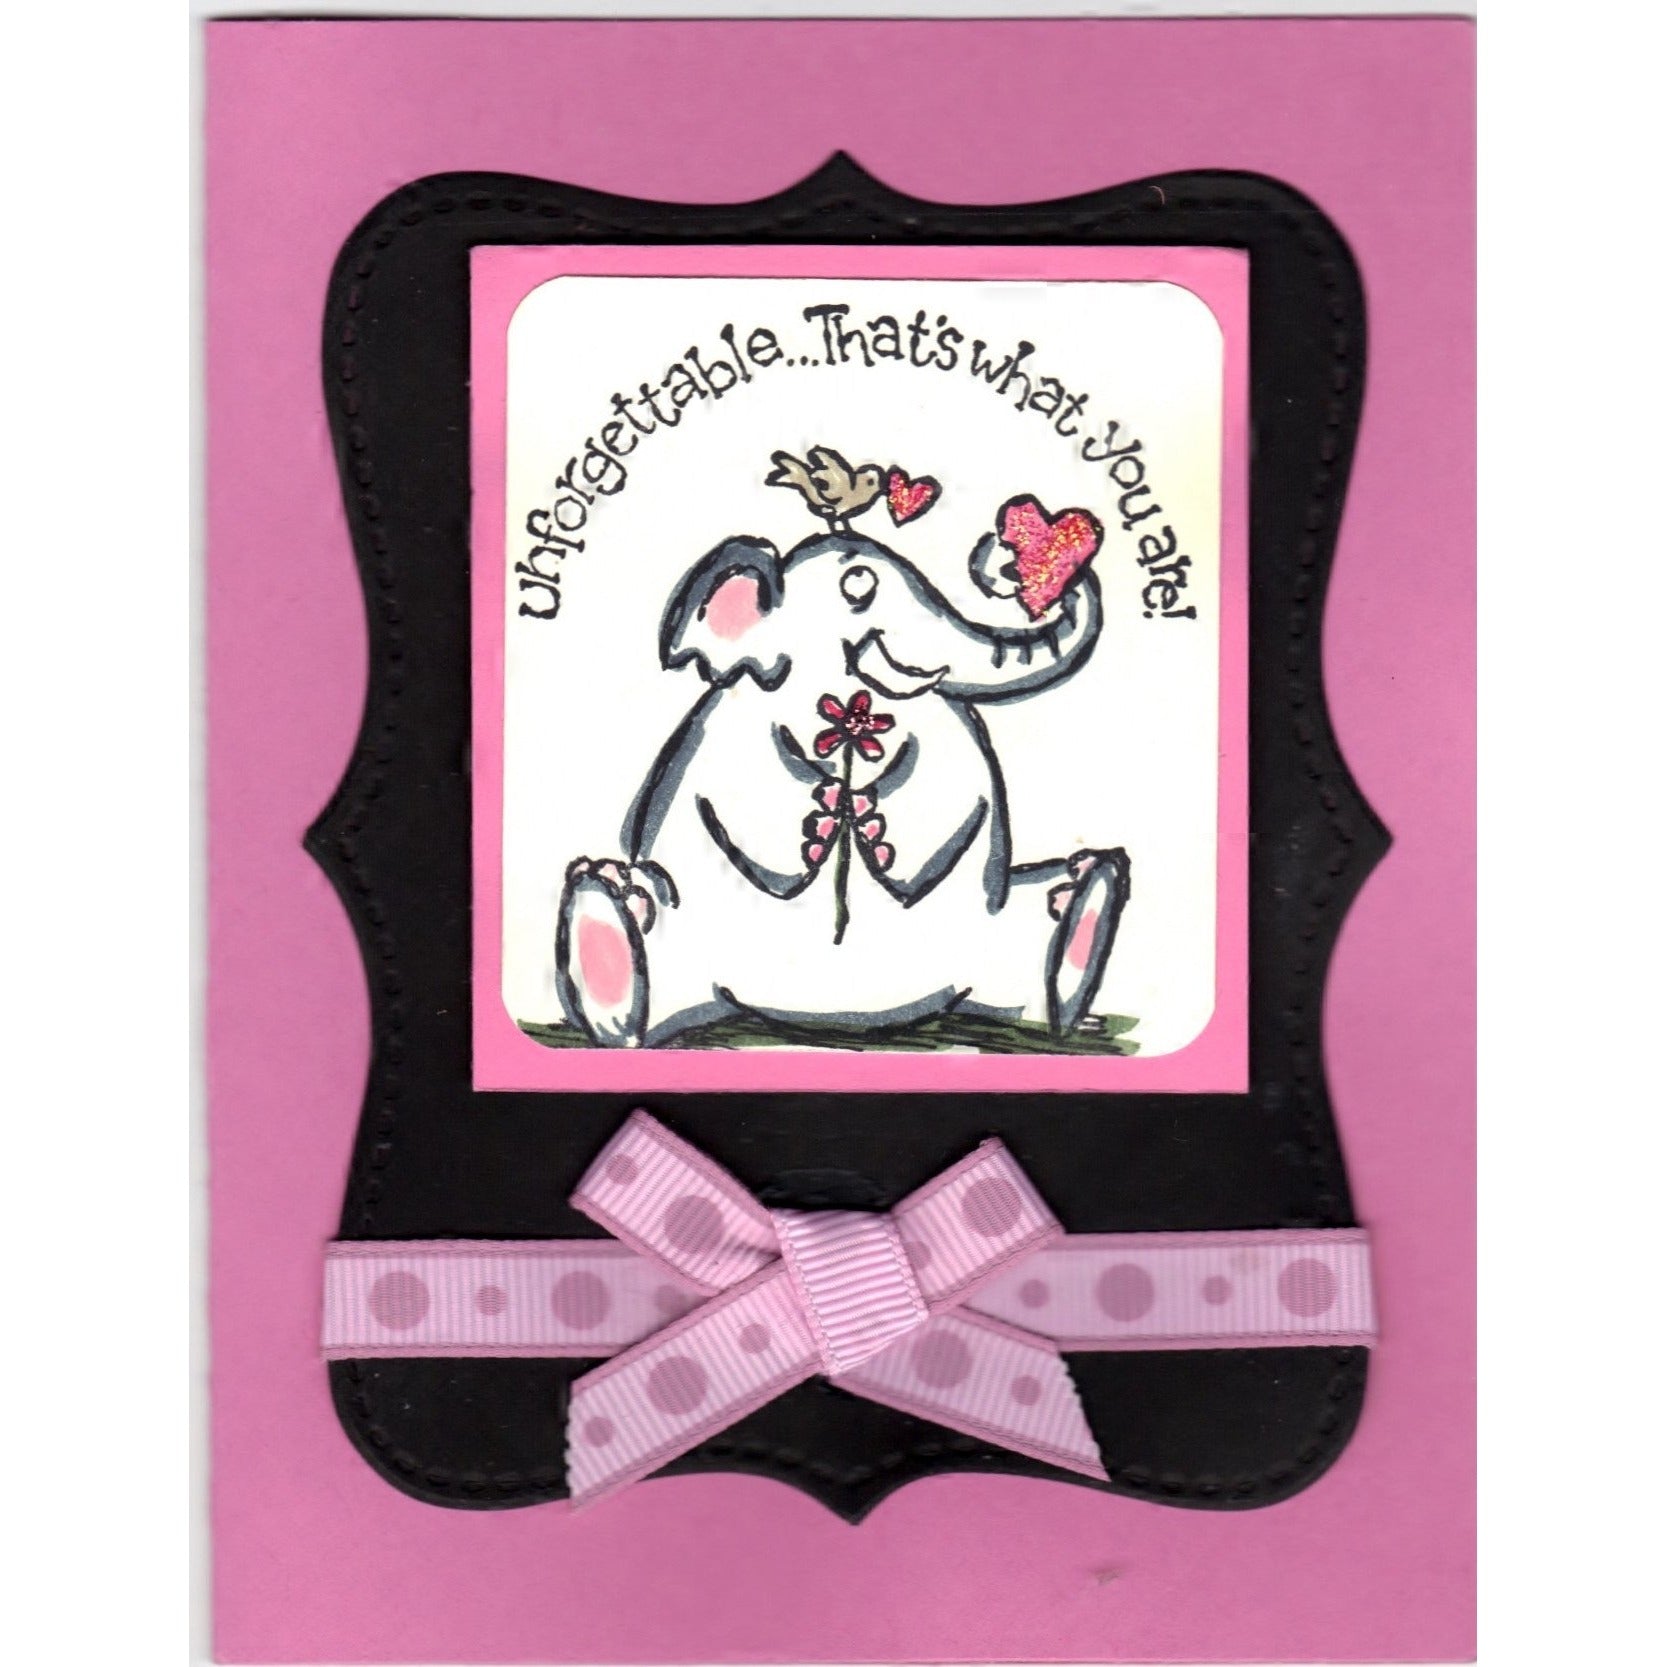 Unforgettable Elephant Handmade Good Greeting Supply Card - Cards And Other Paper Products - Made In U.S.A. - SharPharMade - 1